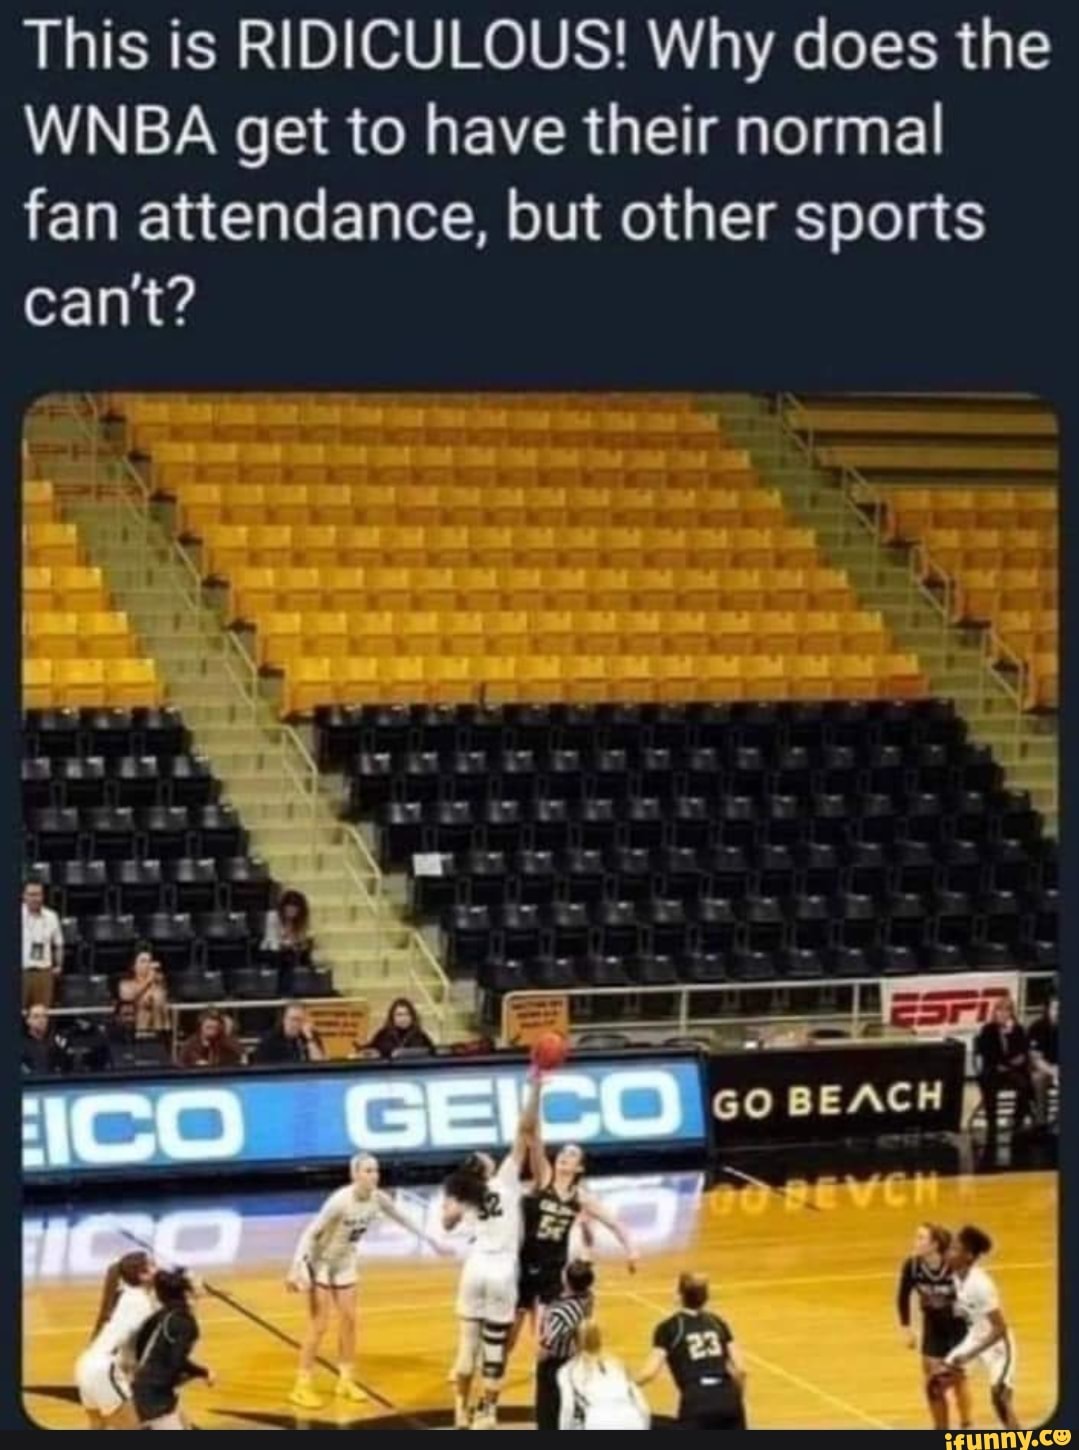 This is RIDICULOUS! Why does the WNBA get to have their normal fan